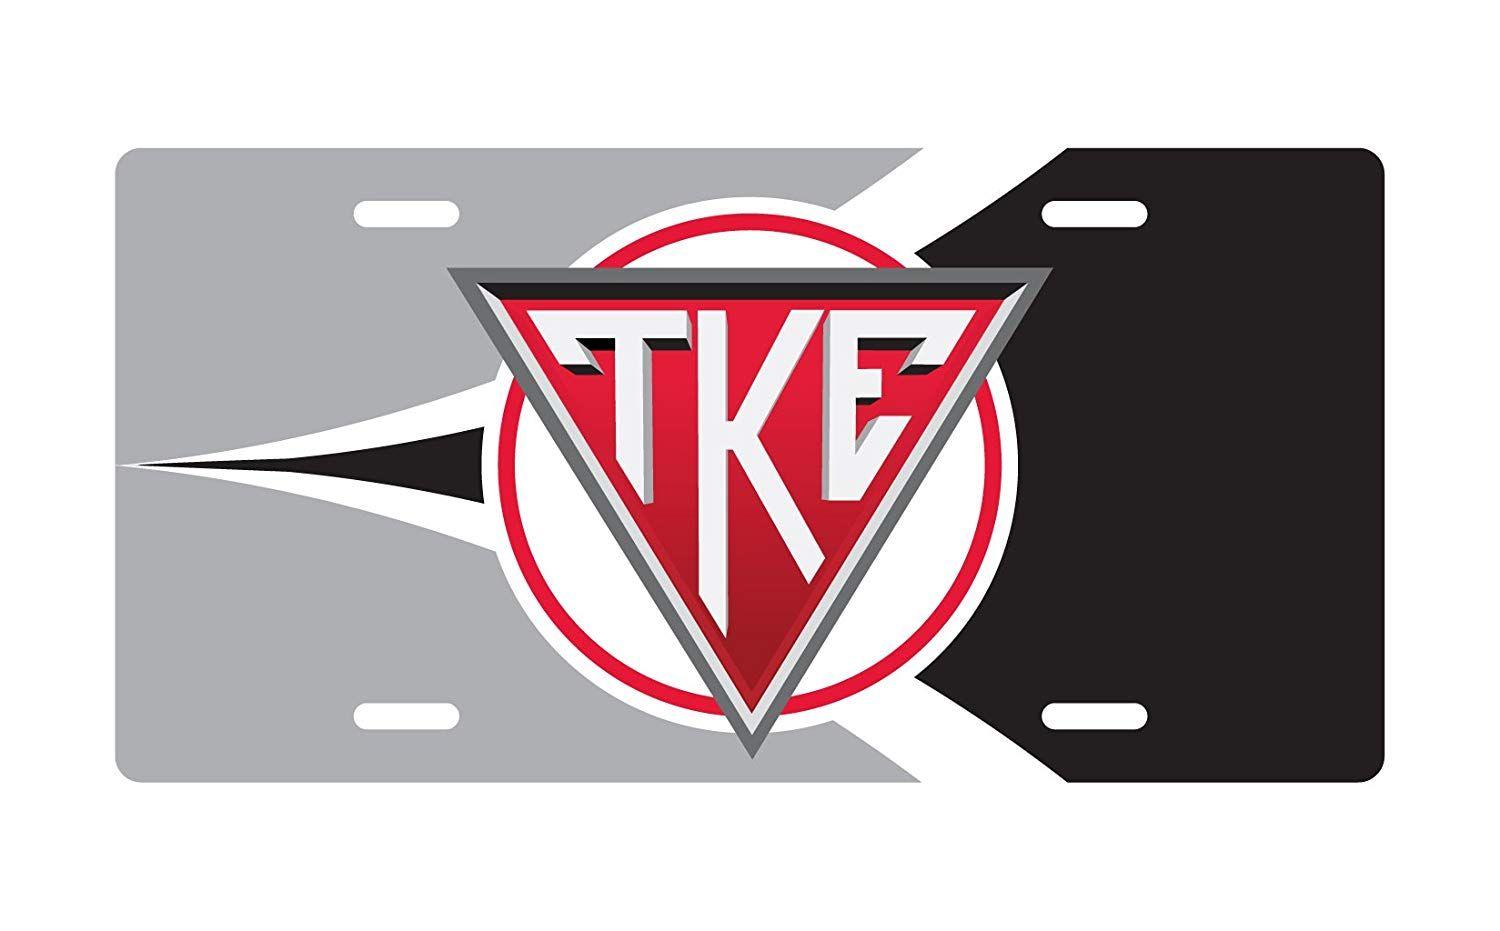 TKE Logo - Amazon.com : VictoryStore License Plate Frame, Front License Plate